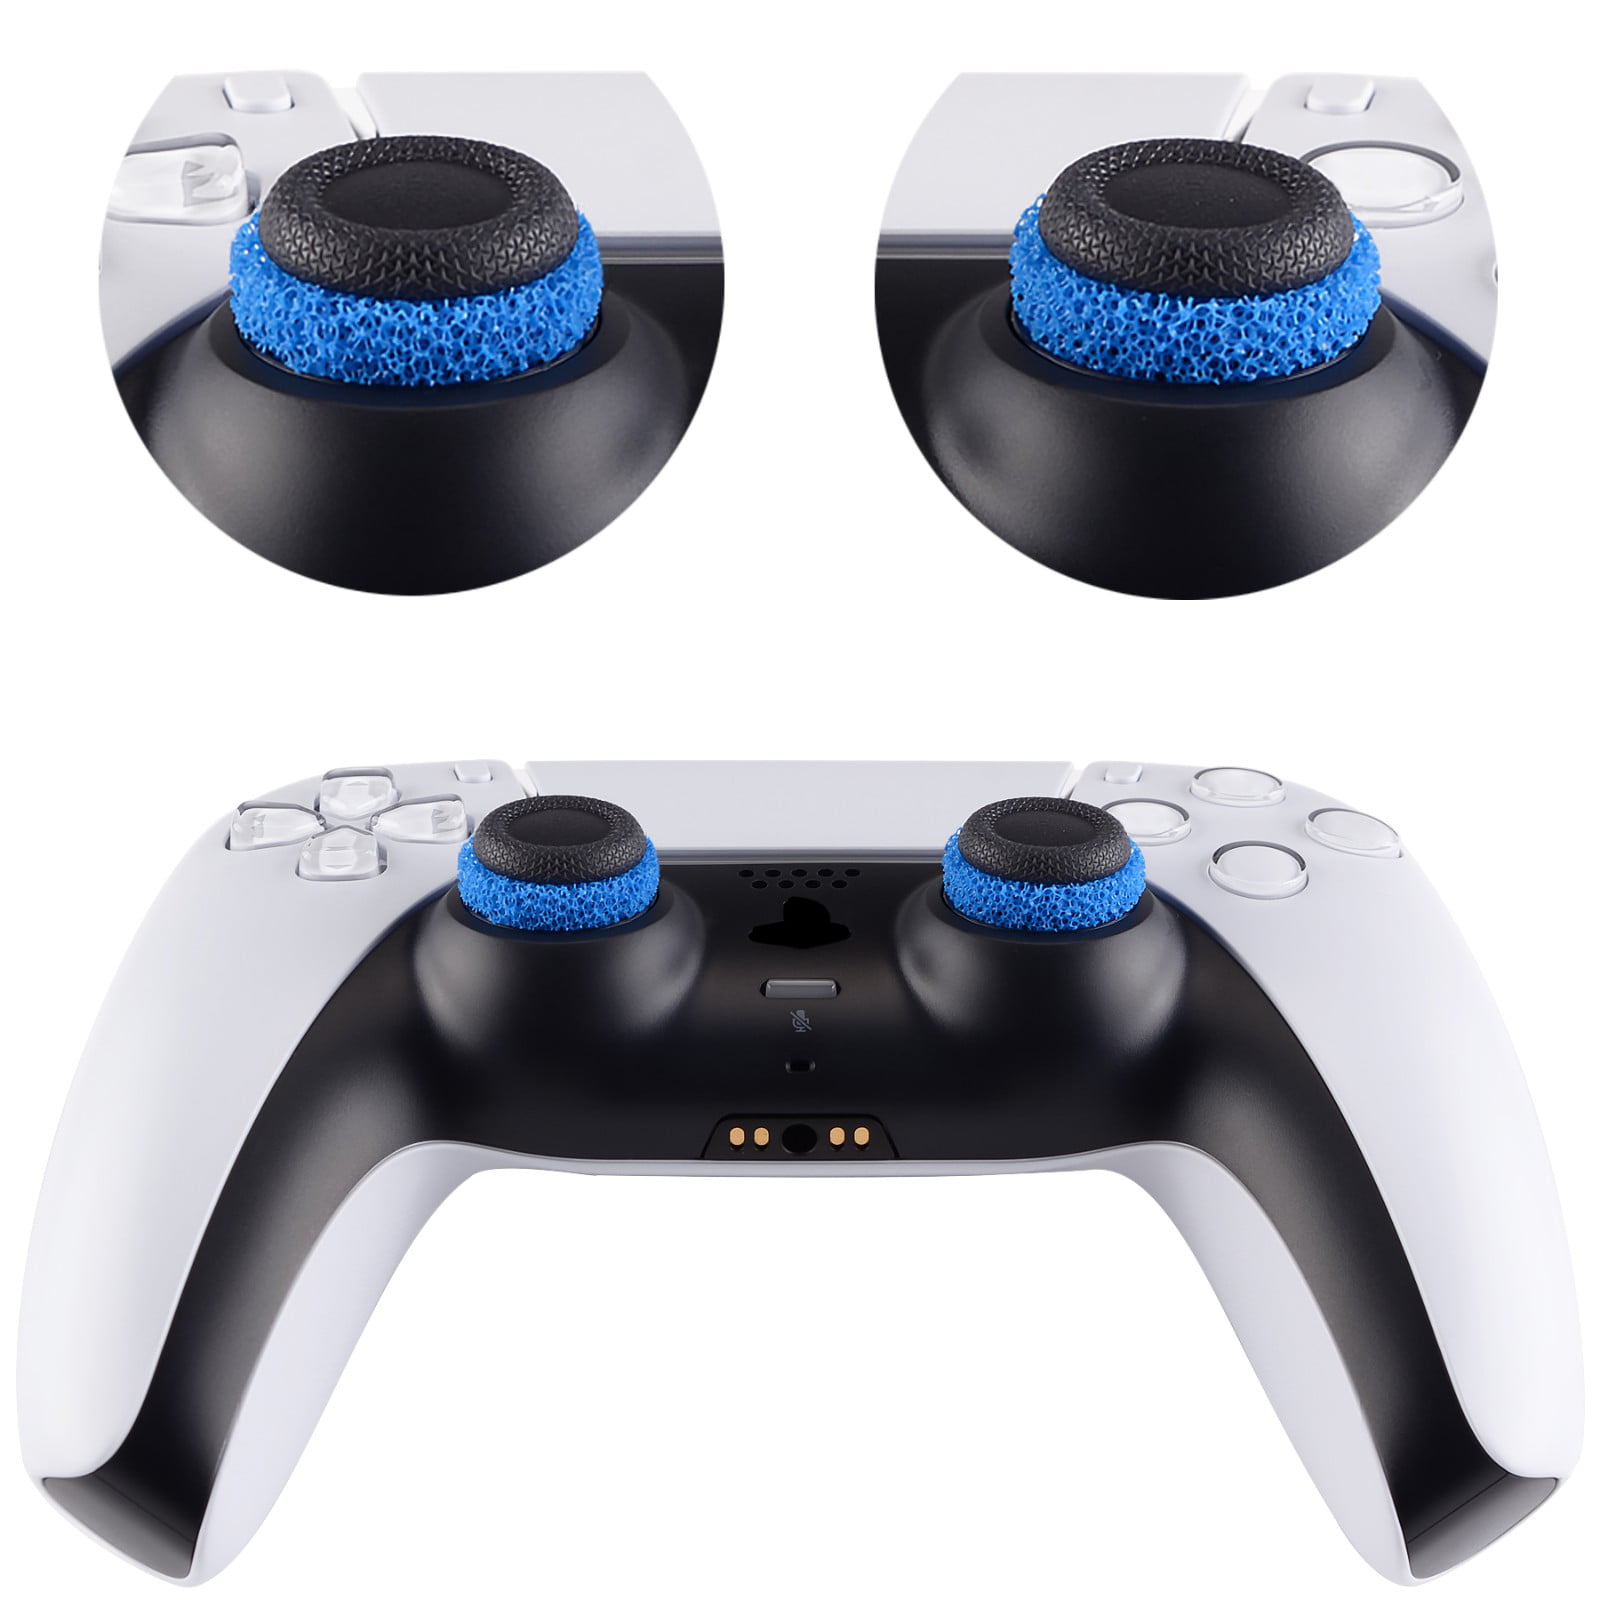 PlayVital 5 Pairs Aim Assist Target Motion Control Precision Rings for PS5,  for PS4, Xbox Series X/S, Xbox One, Xbox 360, Switch Pro Controller - 5  Colors 3 Different Strength 